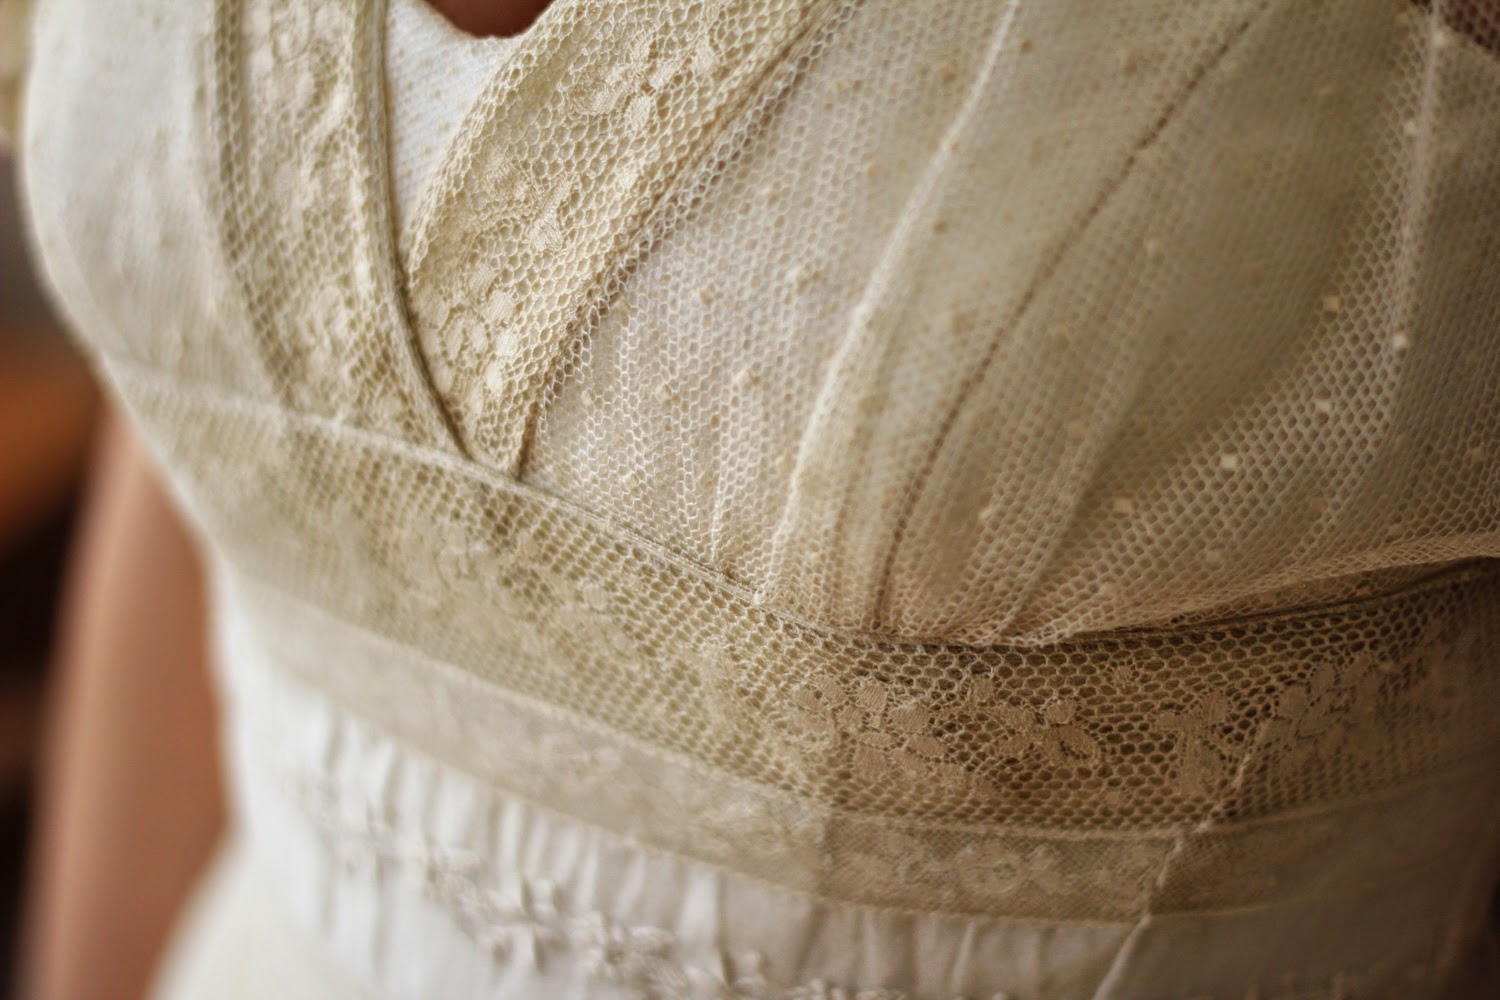 My antique lace wedding dress - made from Normandy lace bedspread